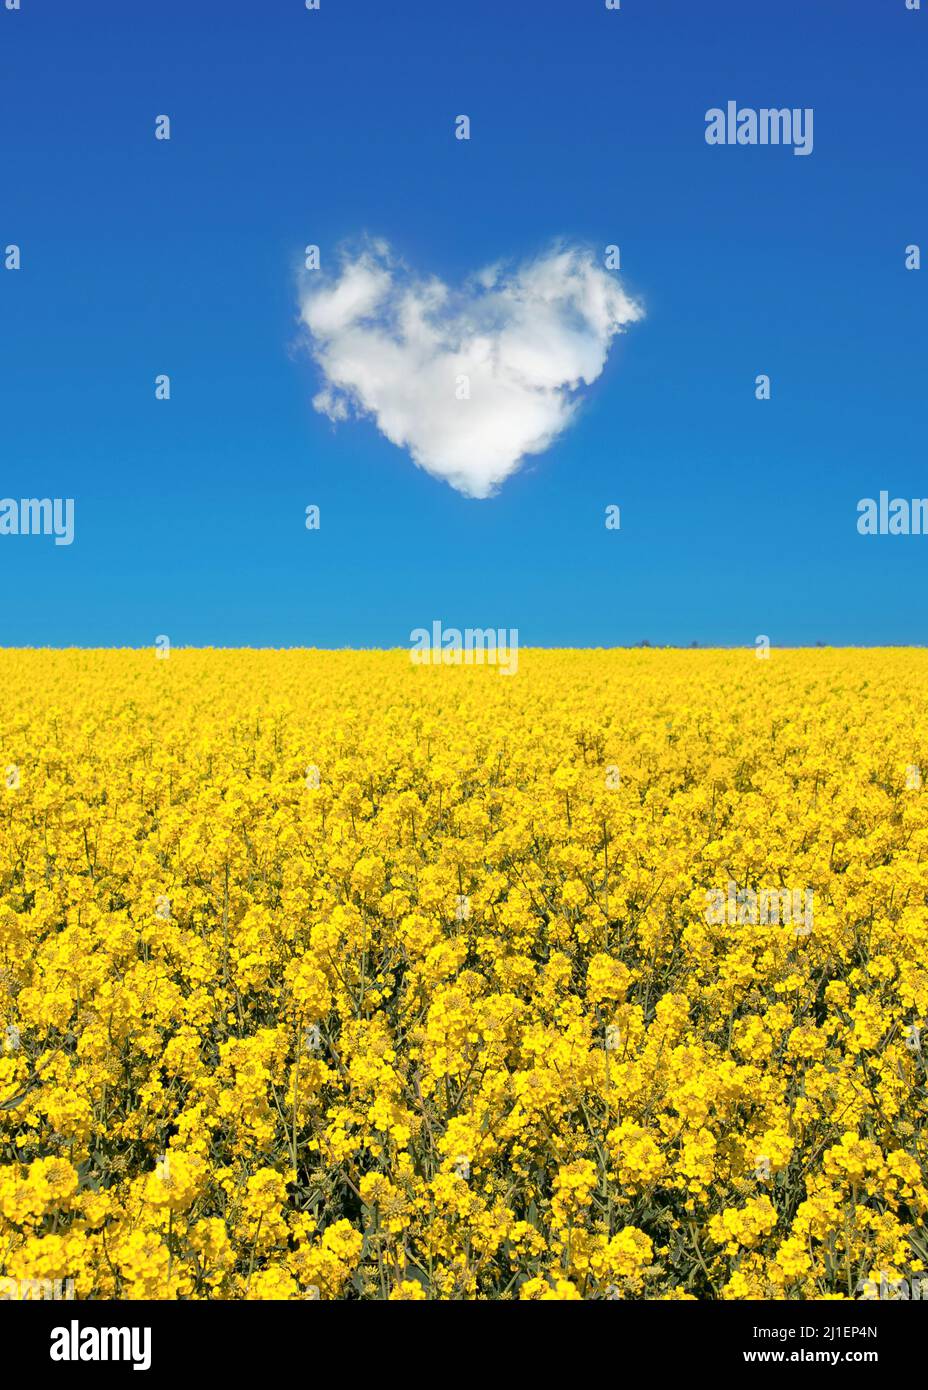 Peace for Ukraine, yellow field and blue sky with a cloud in shape of a heart, Ukrainian flag colors, Ukraine war support concept Stock Photo